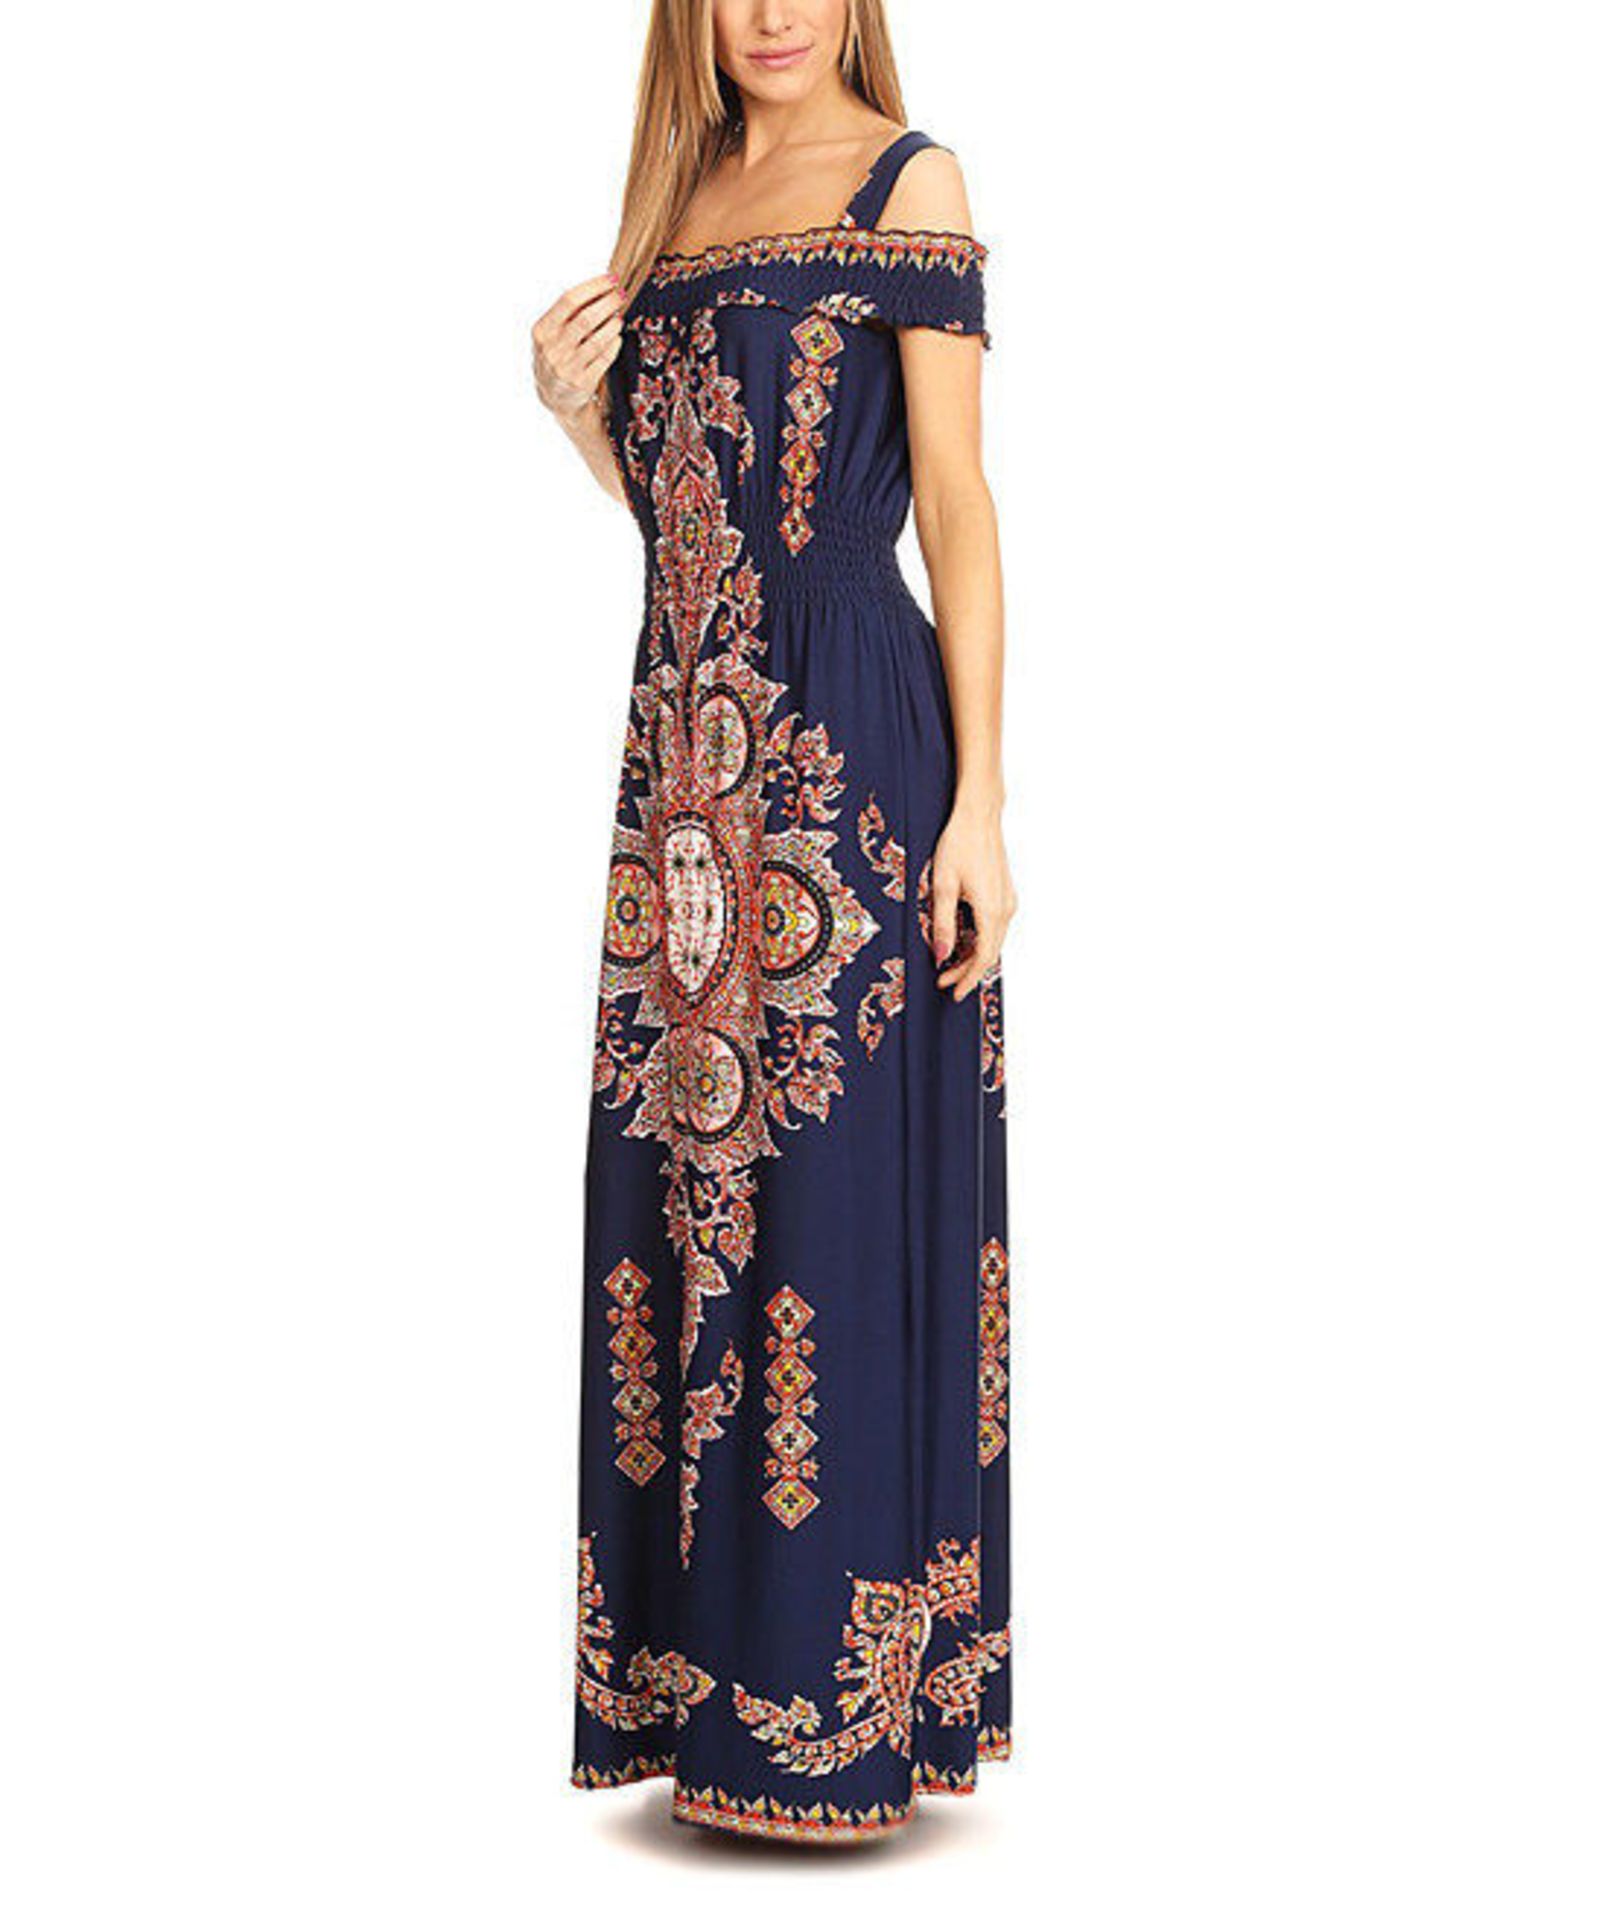 Bellaberry Usa Navy Geometric Off-Shoulder Maxi Dress - Plus(Uk 22/24:Us 18/20) (New With Tags) [ - Image 2 of 3